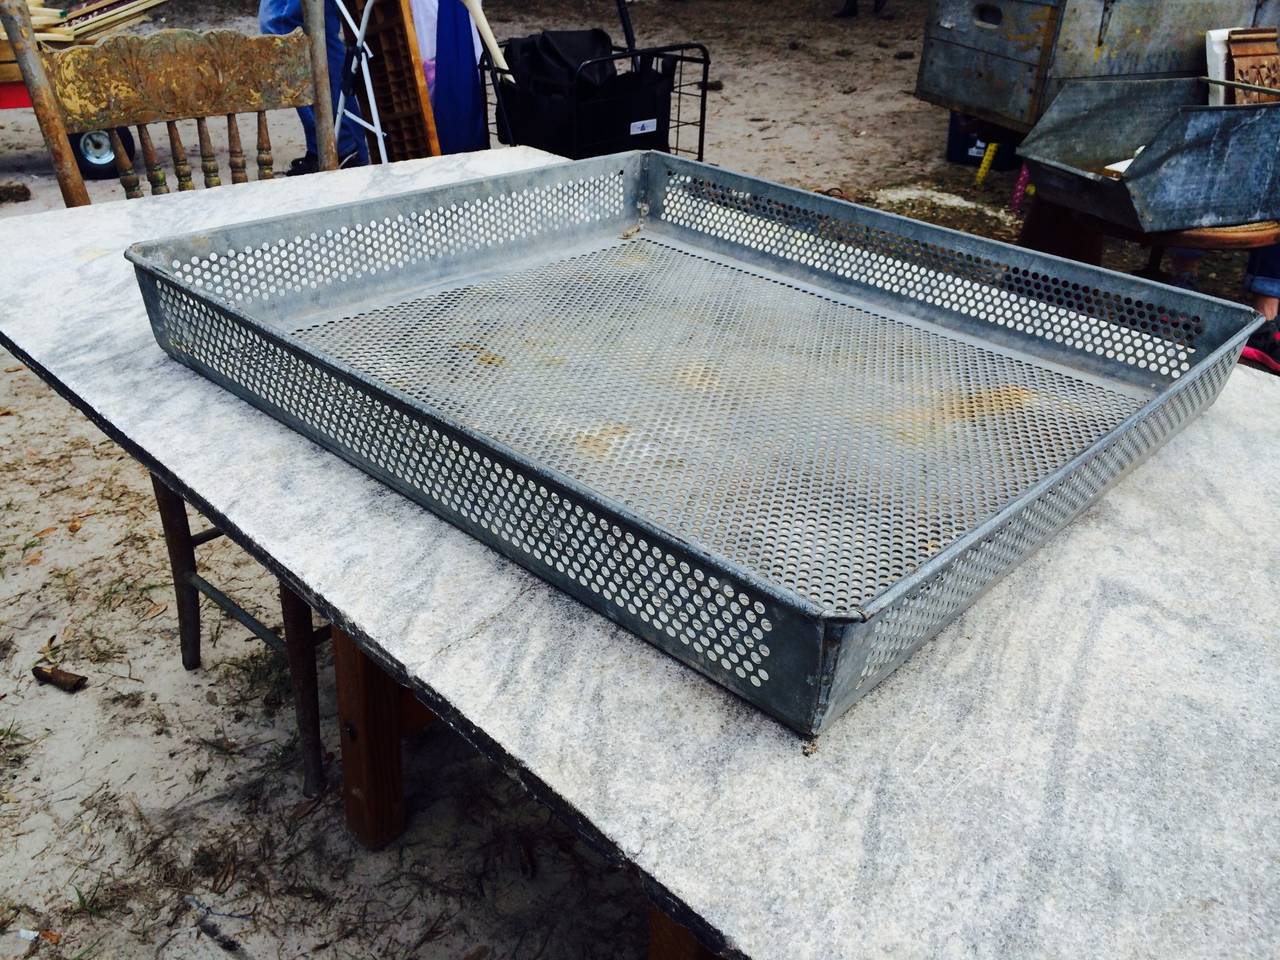 Galvanized steel perforated sorting/rinsing bins used in a factory. Ideal for potted plants. Three available.